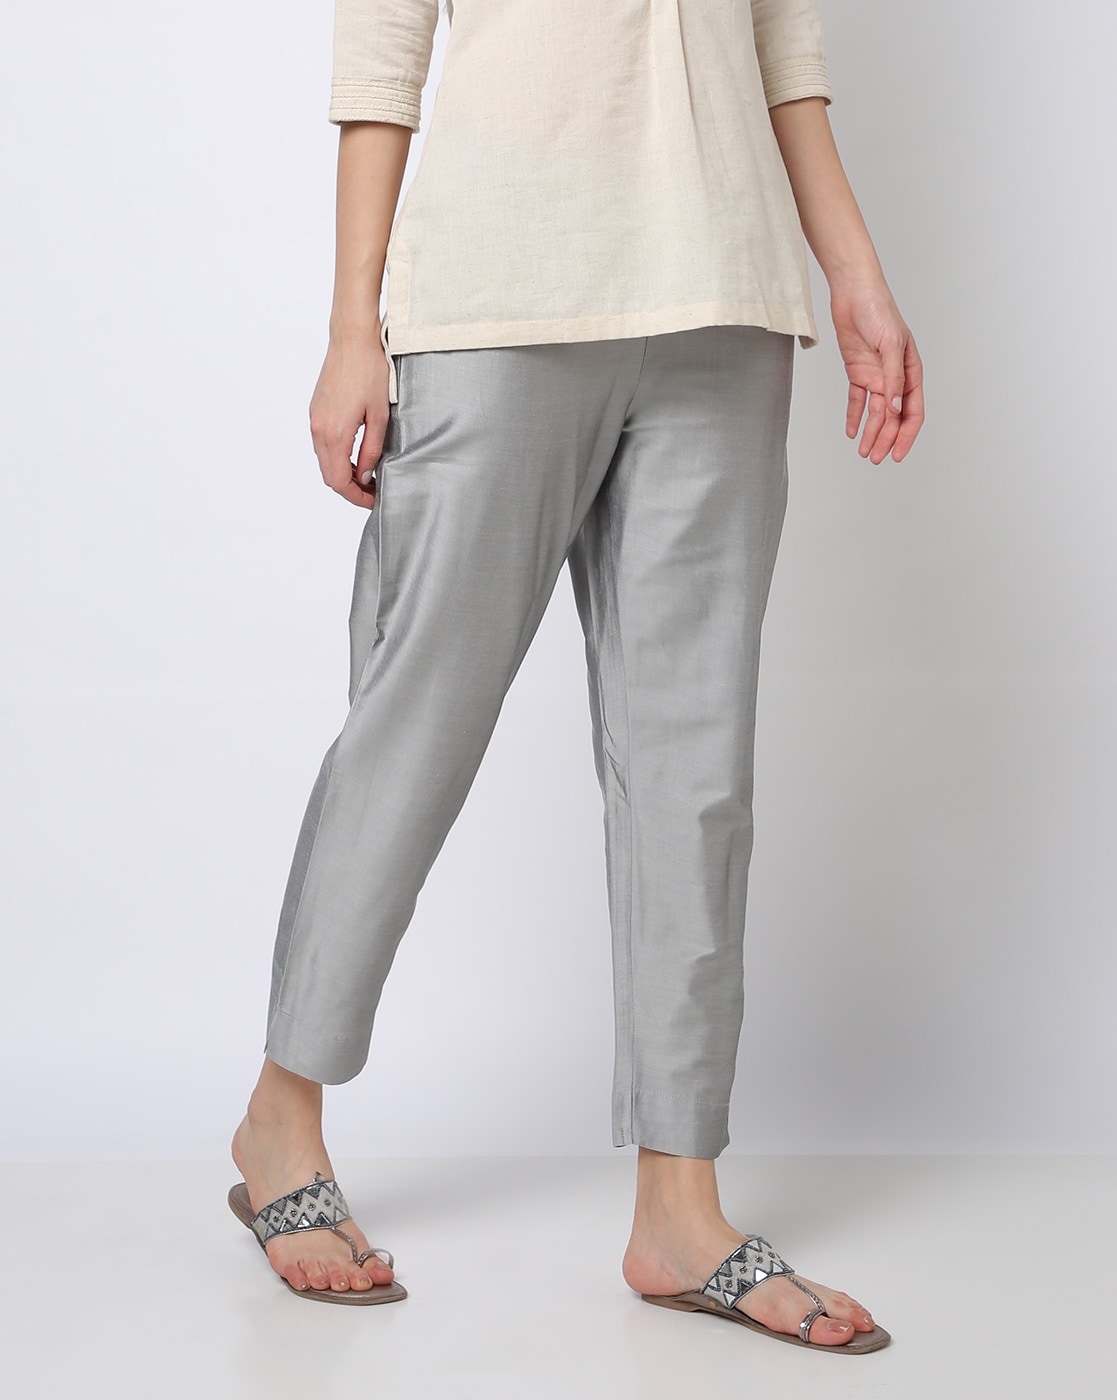 Buy ZRI Textured Pants with Elasticated Waist at Redfynd